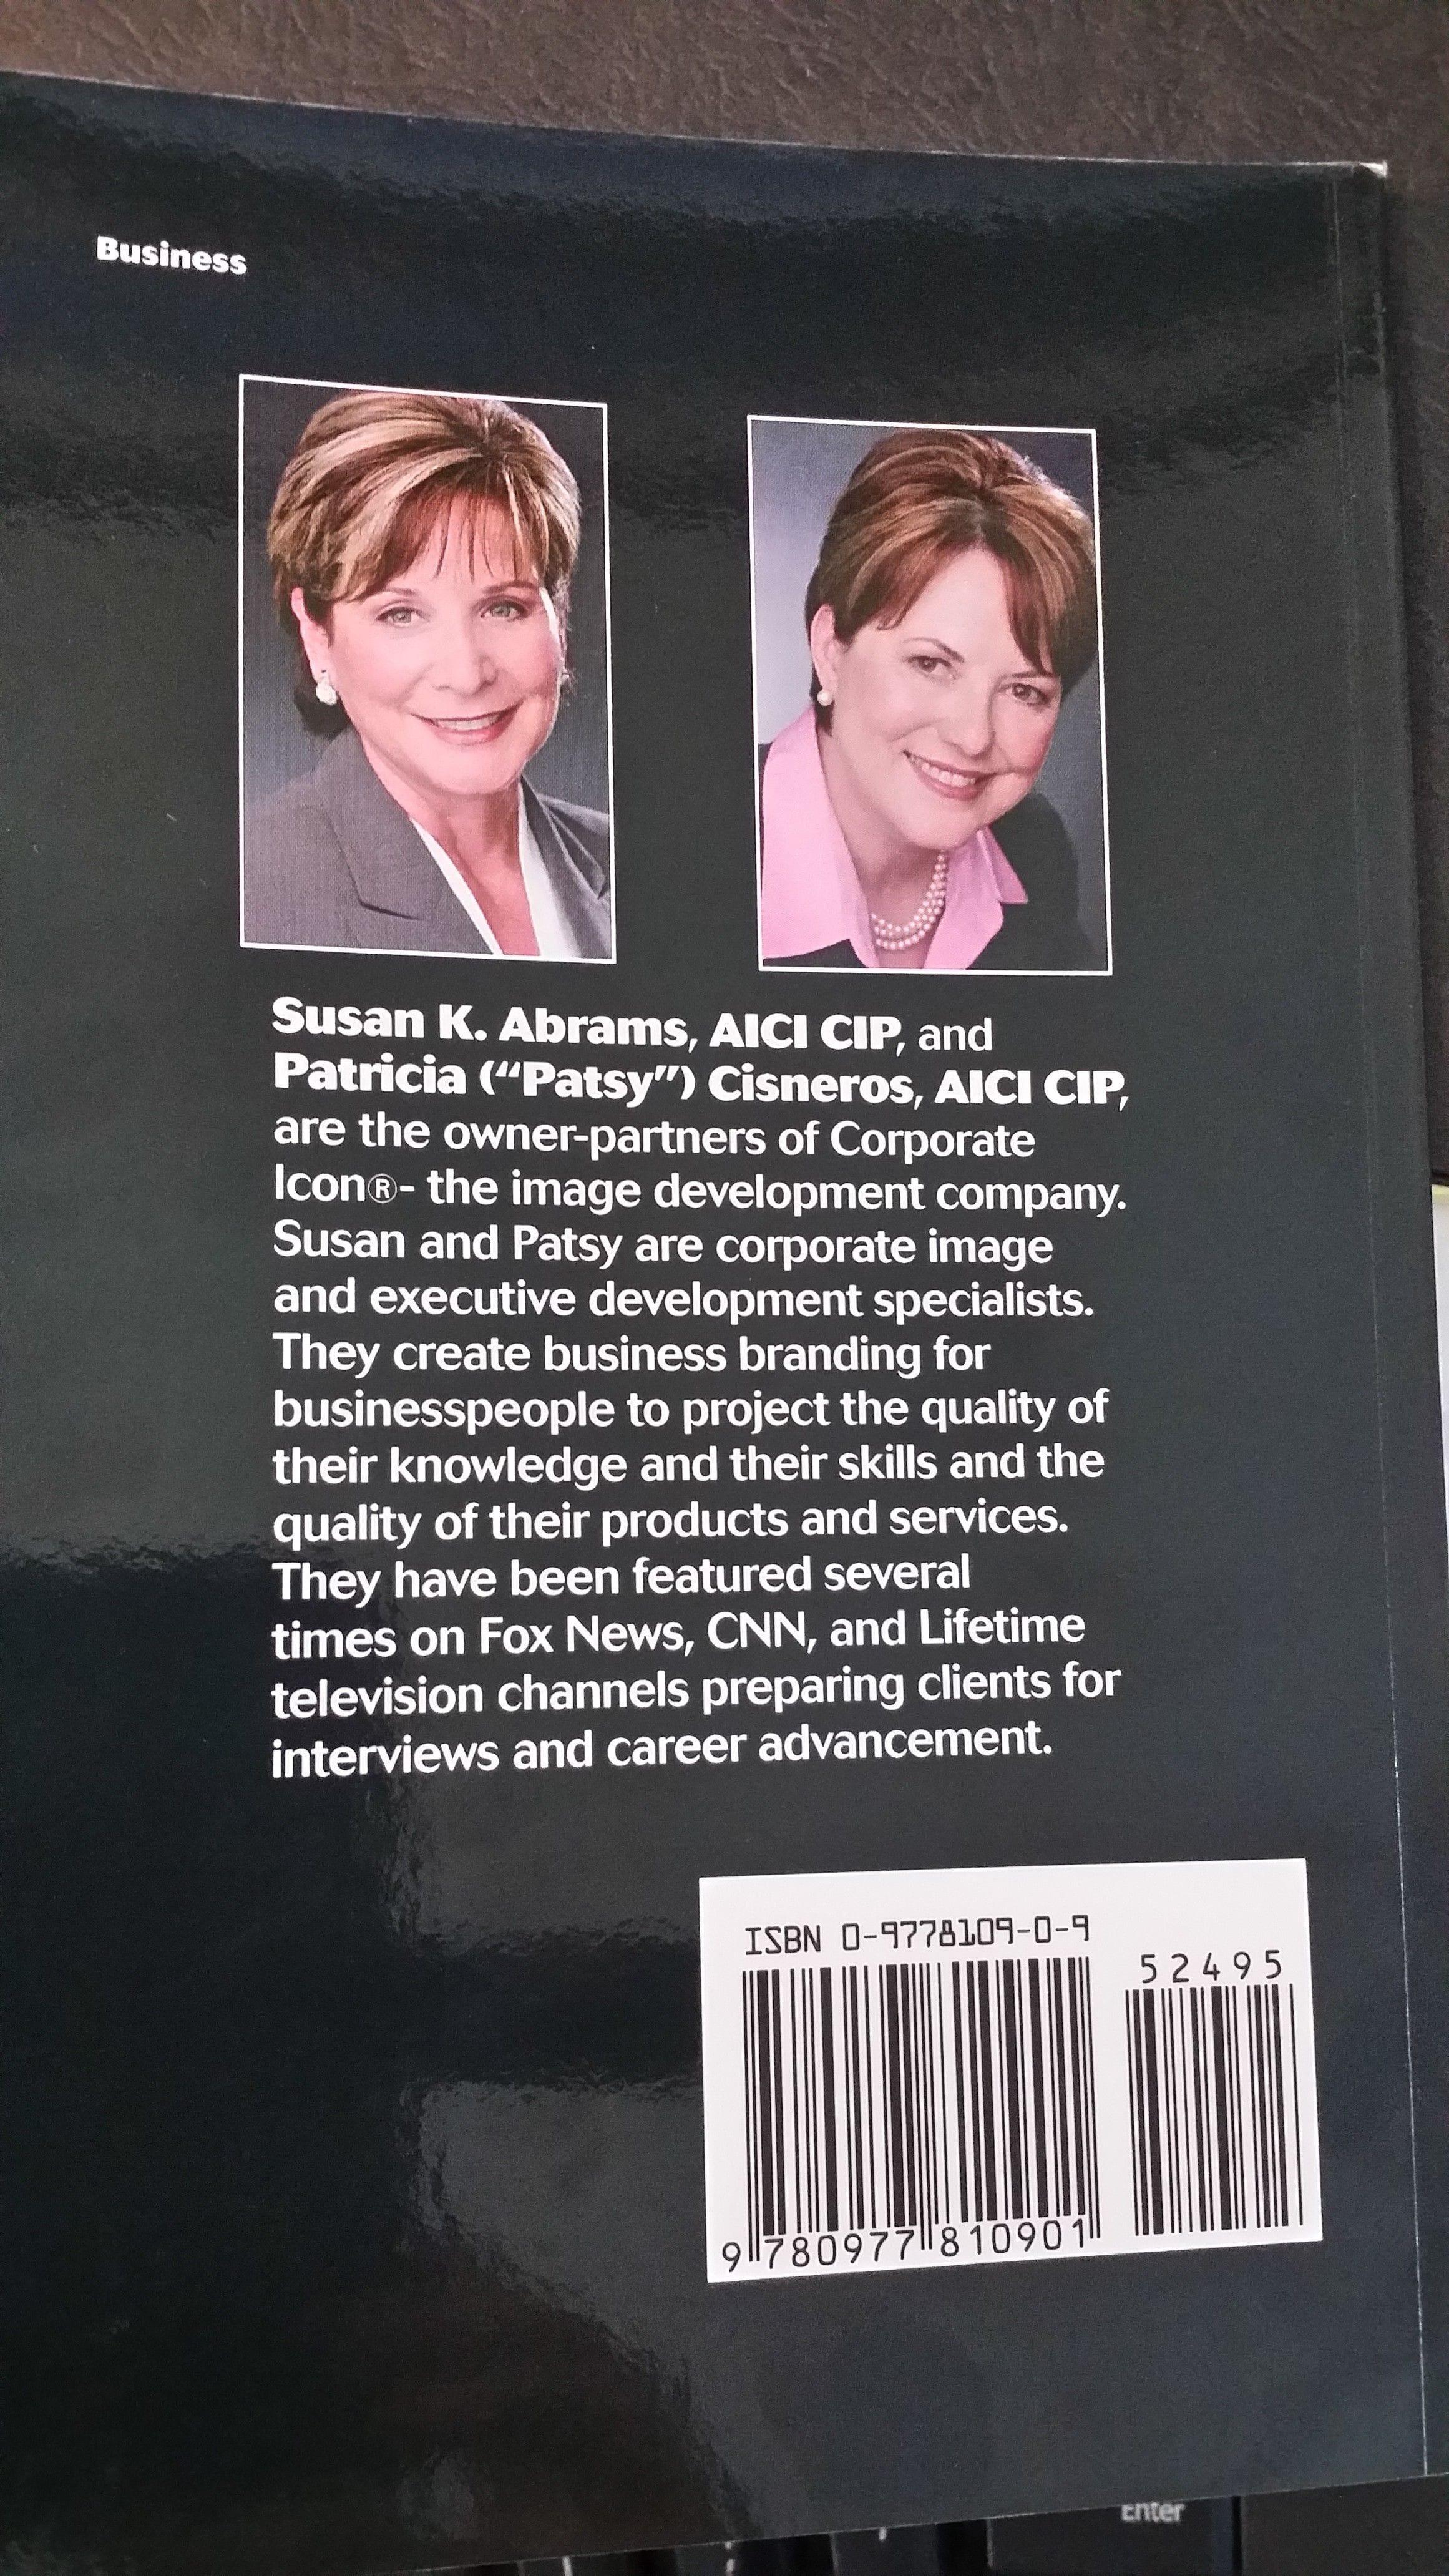 Authors: Patsy Cisneros and Susan K. Abrams of Corporate Icon and Political Icon